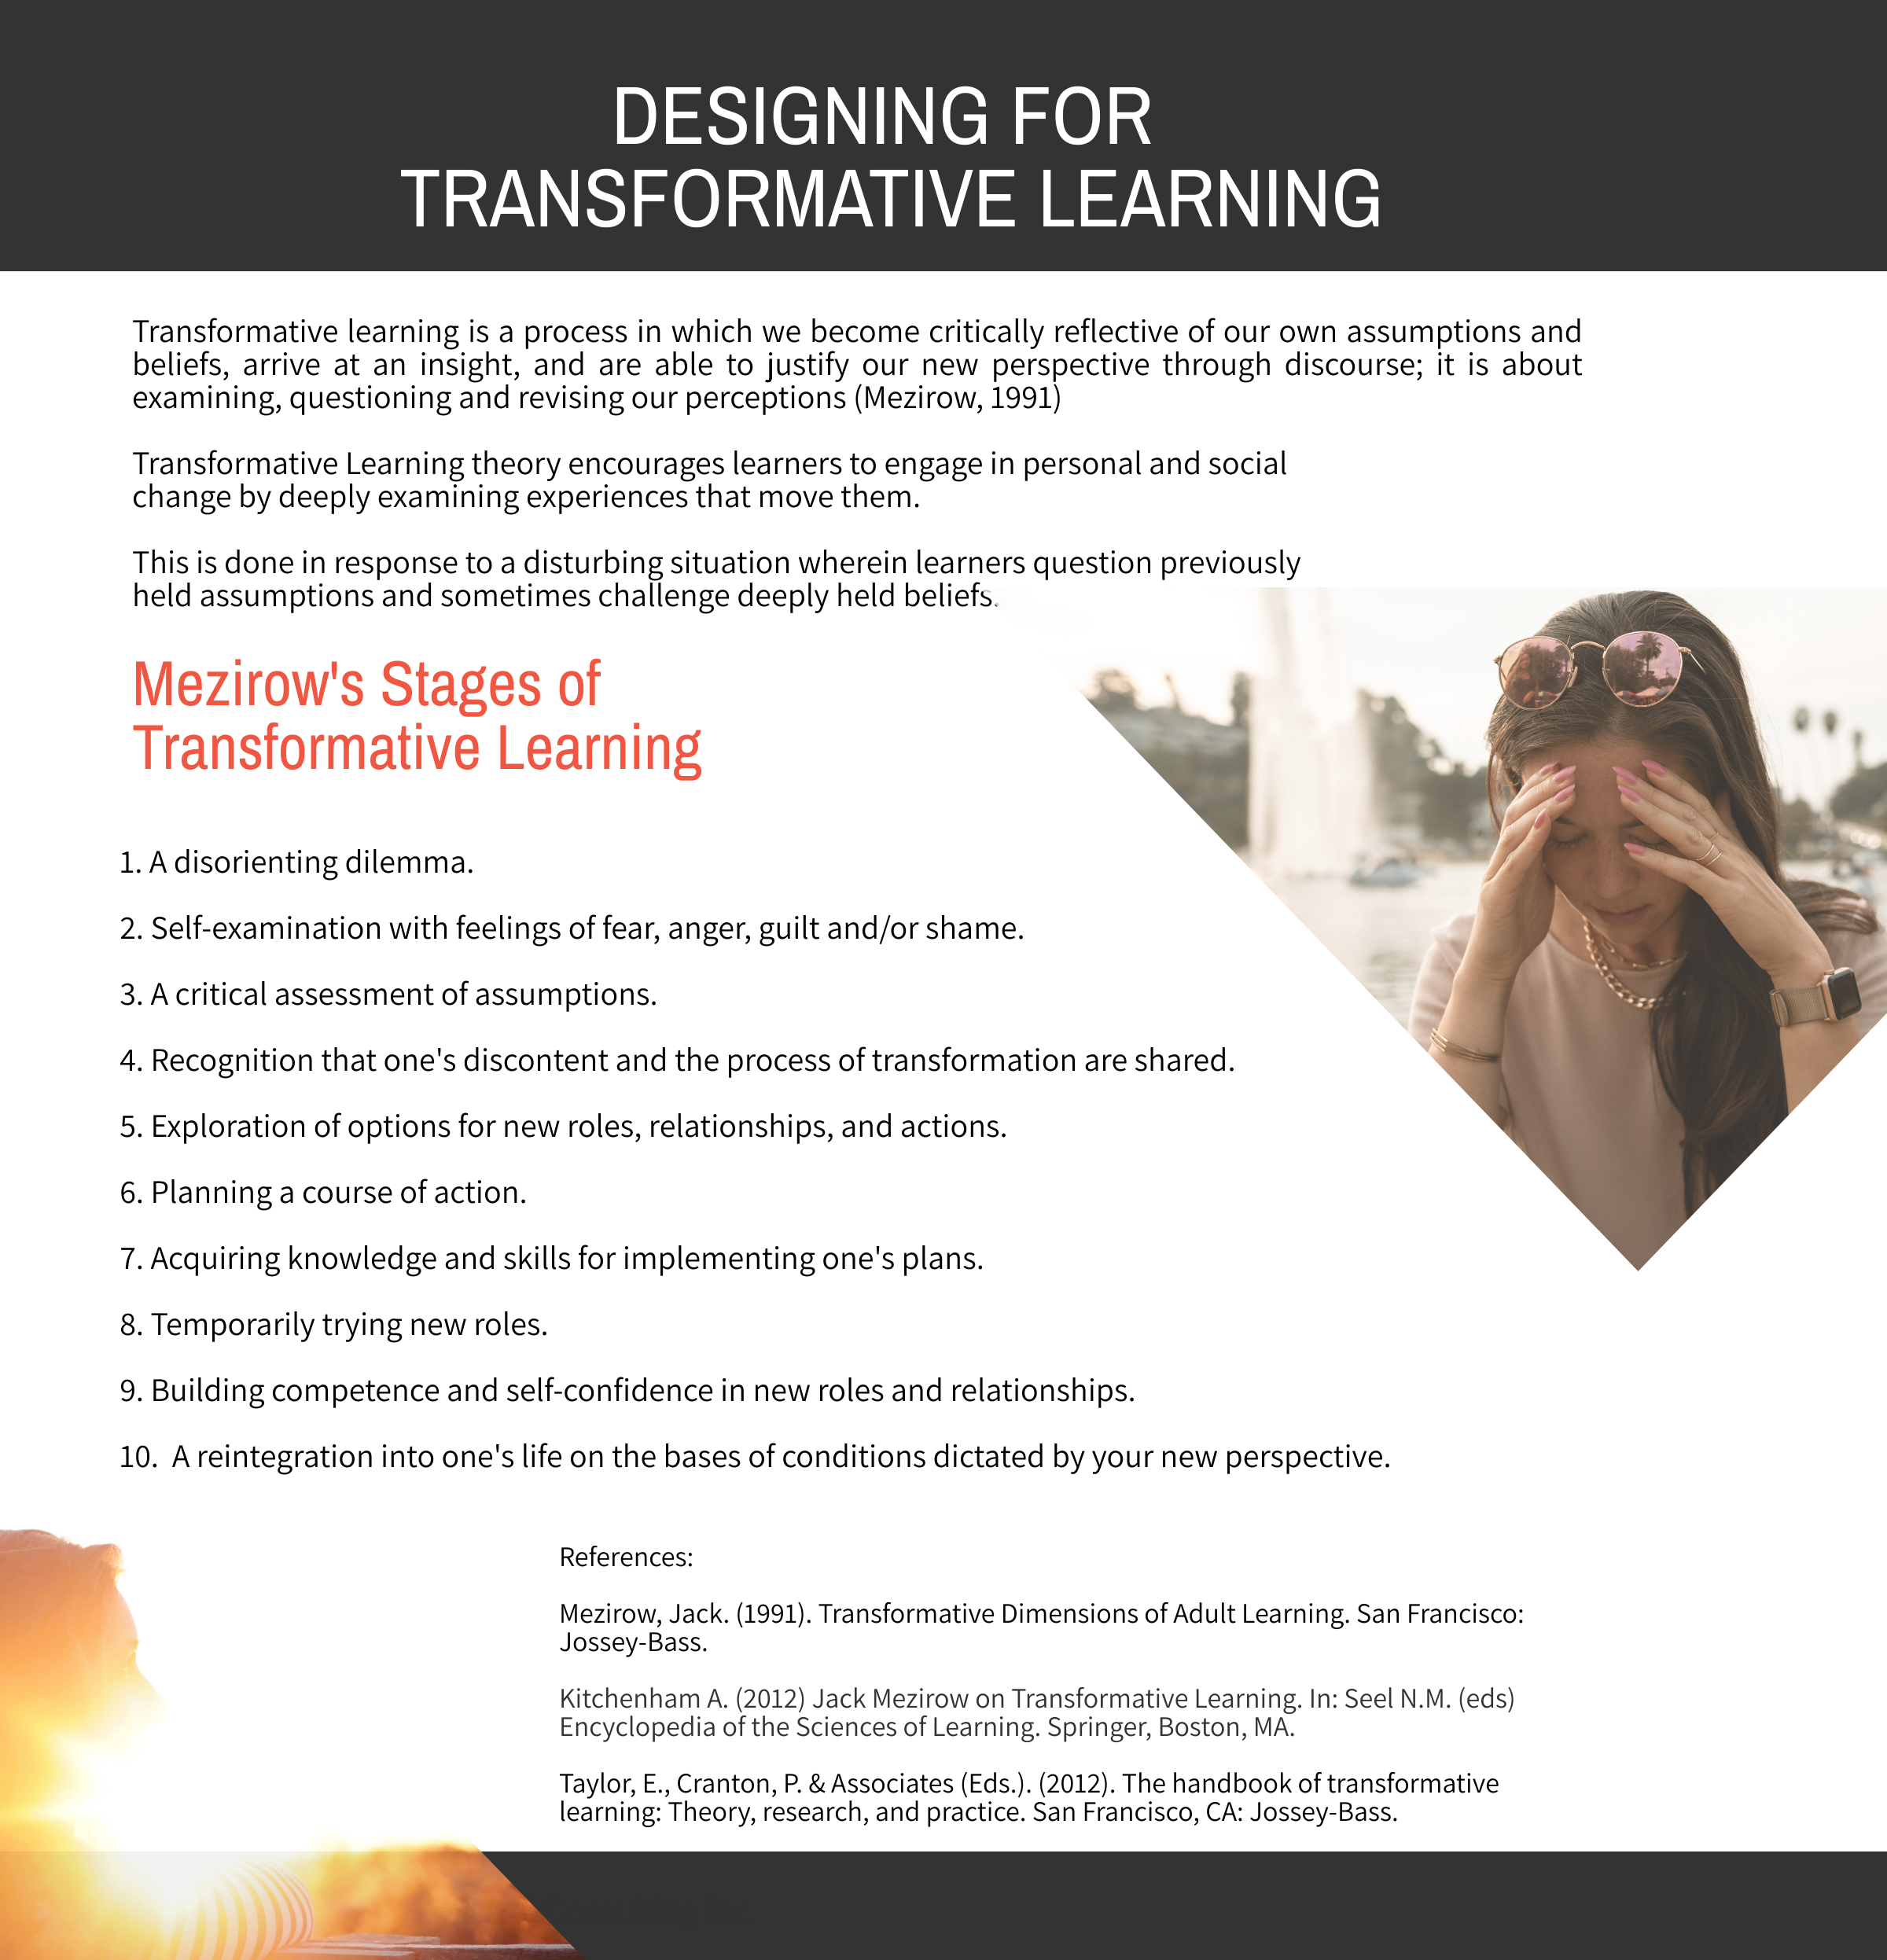 Designing for Transformative Learning